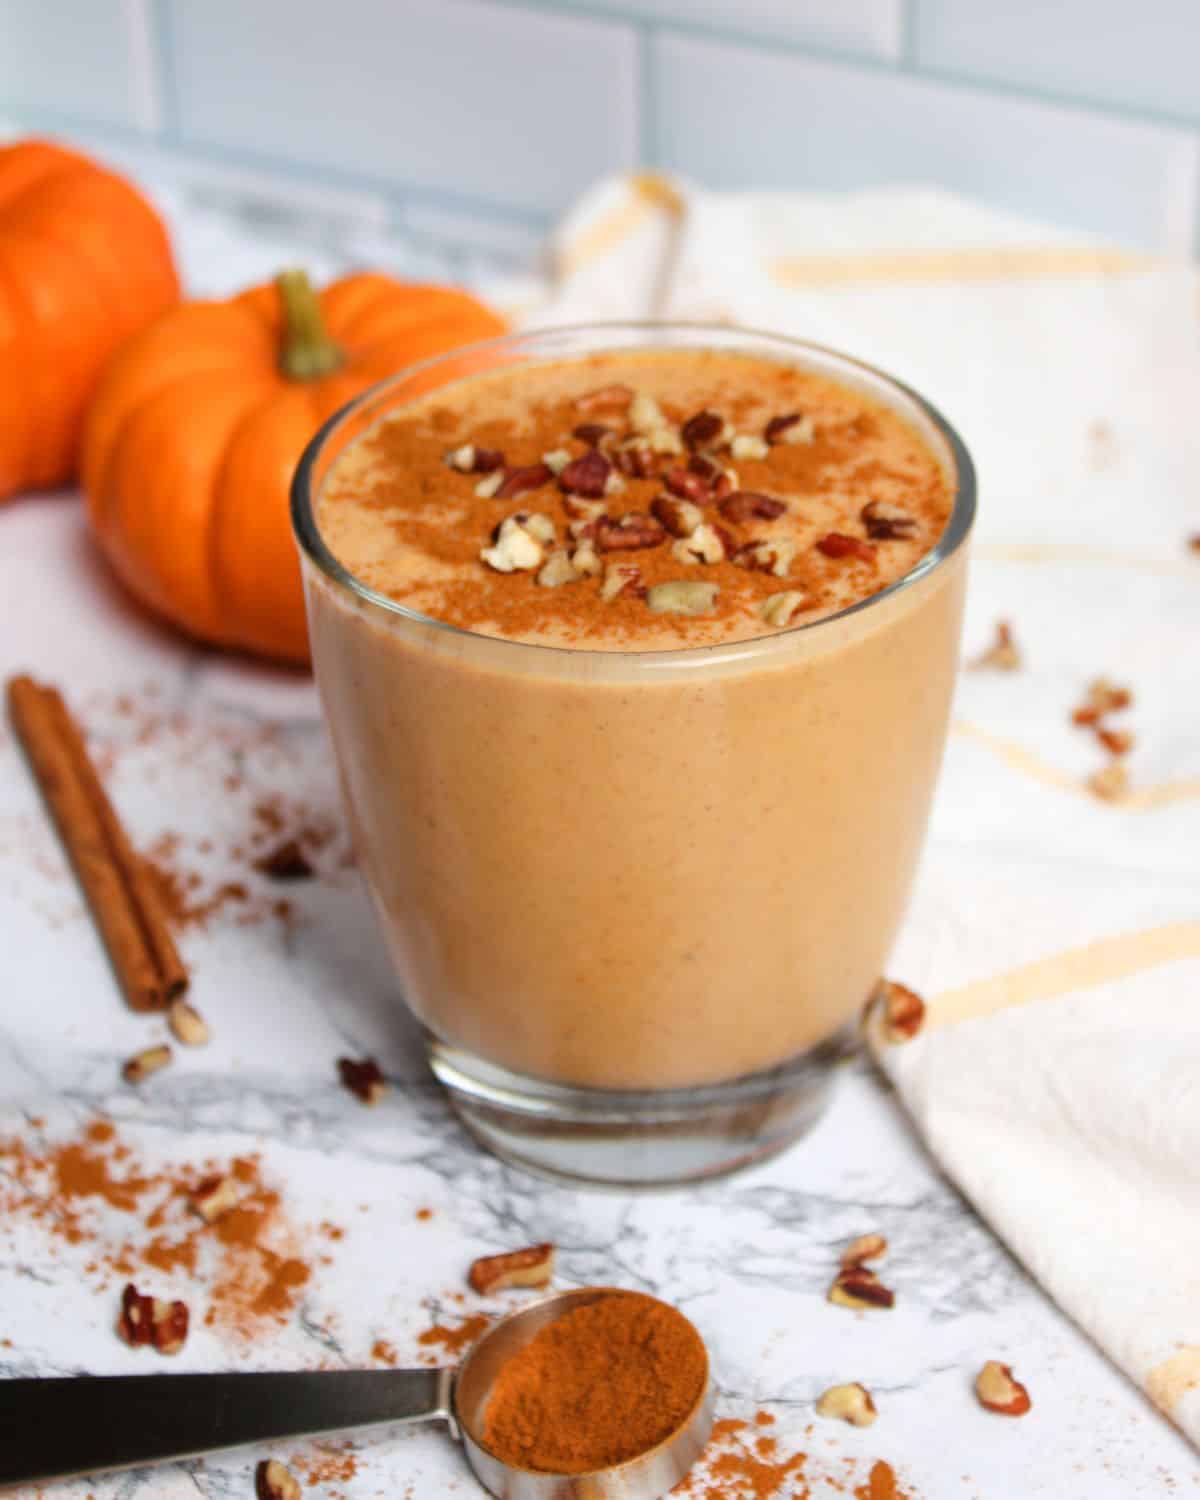 pumpkin smoothie in a glass with cinnamon and chopped nuts on top. pumpkins and cinnamon sticks in the background